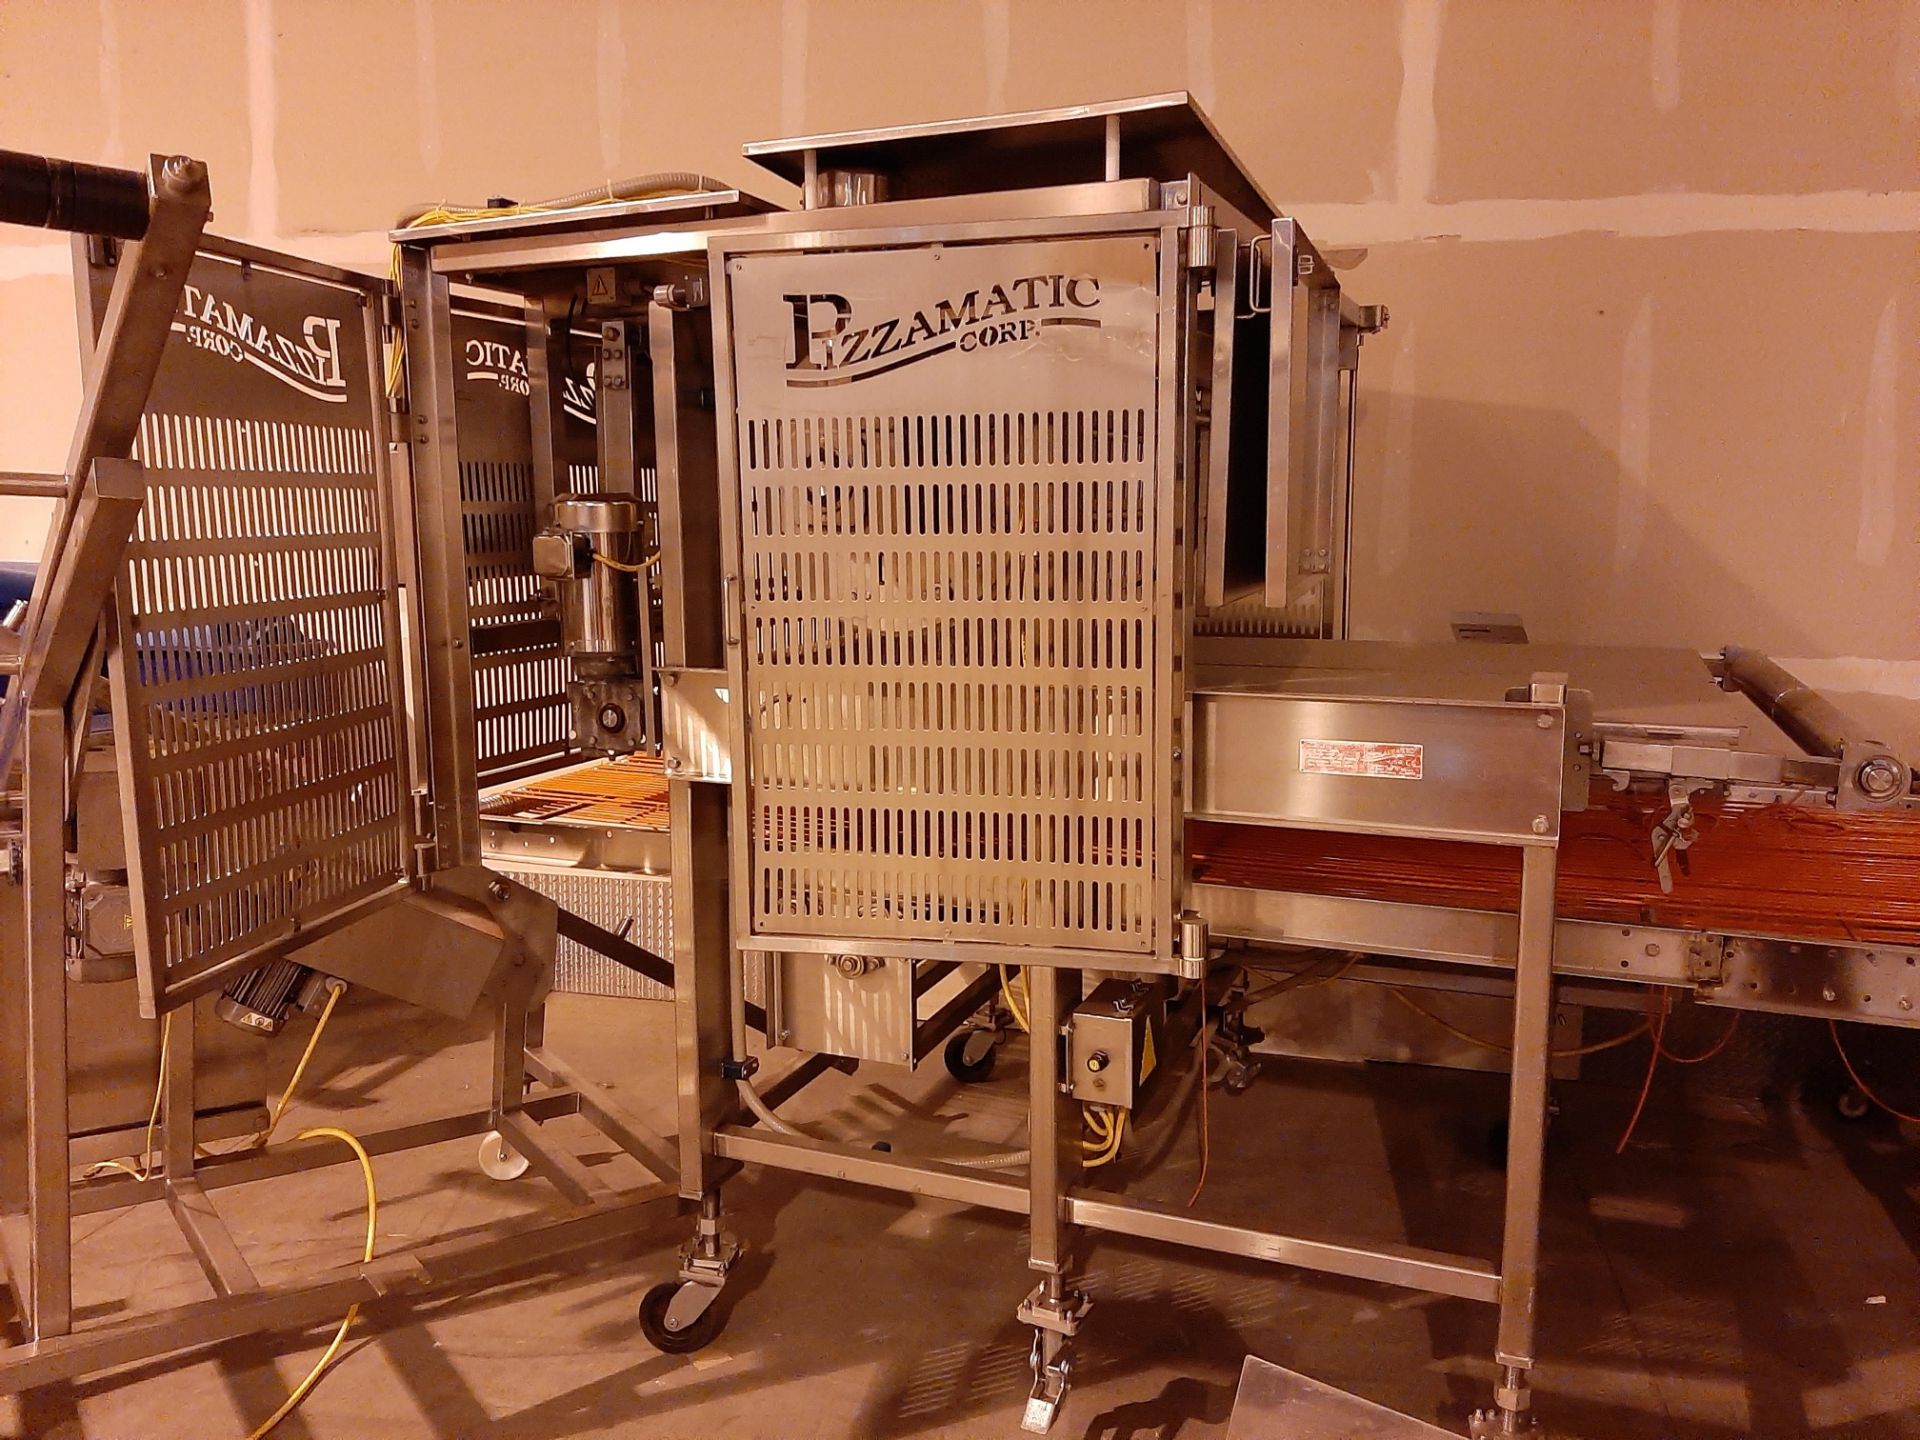 Pizzamatic S/S Topping Applicator (Located in Sioux Falls) - Image 2 of 2